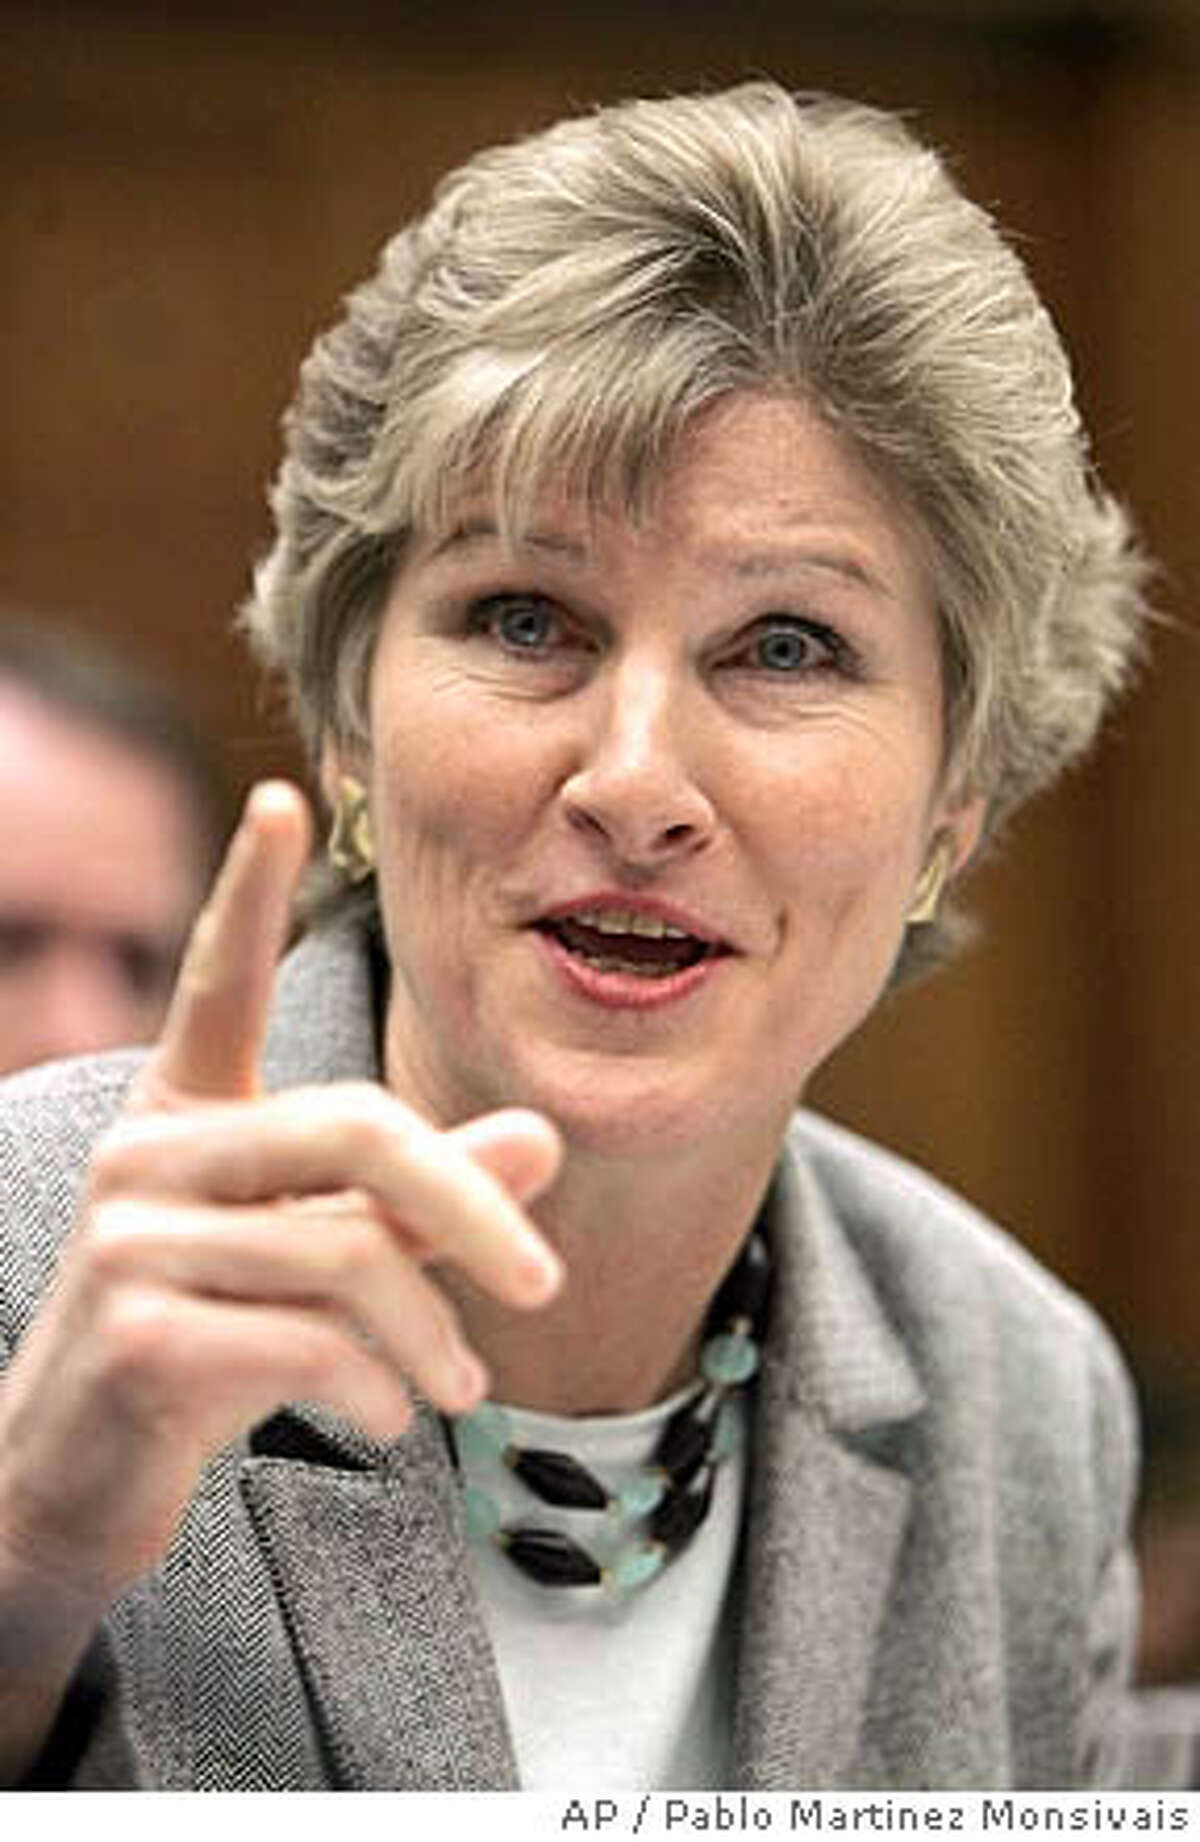 Undersecretary of State Karen Hughes gestures while testifying on Capitol Hill, Thursday, Nov. 10, 2005 before the House International Relations Committee hearing on public diplomacy worldwide. (AP Photo/Pablo Martinez Monsivais)